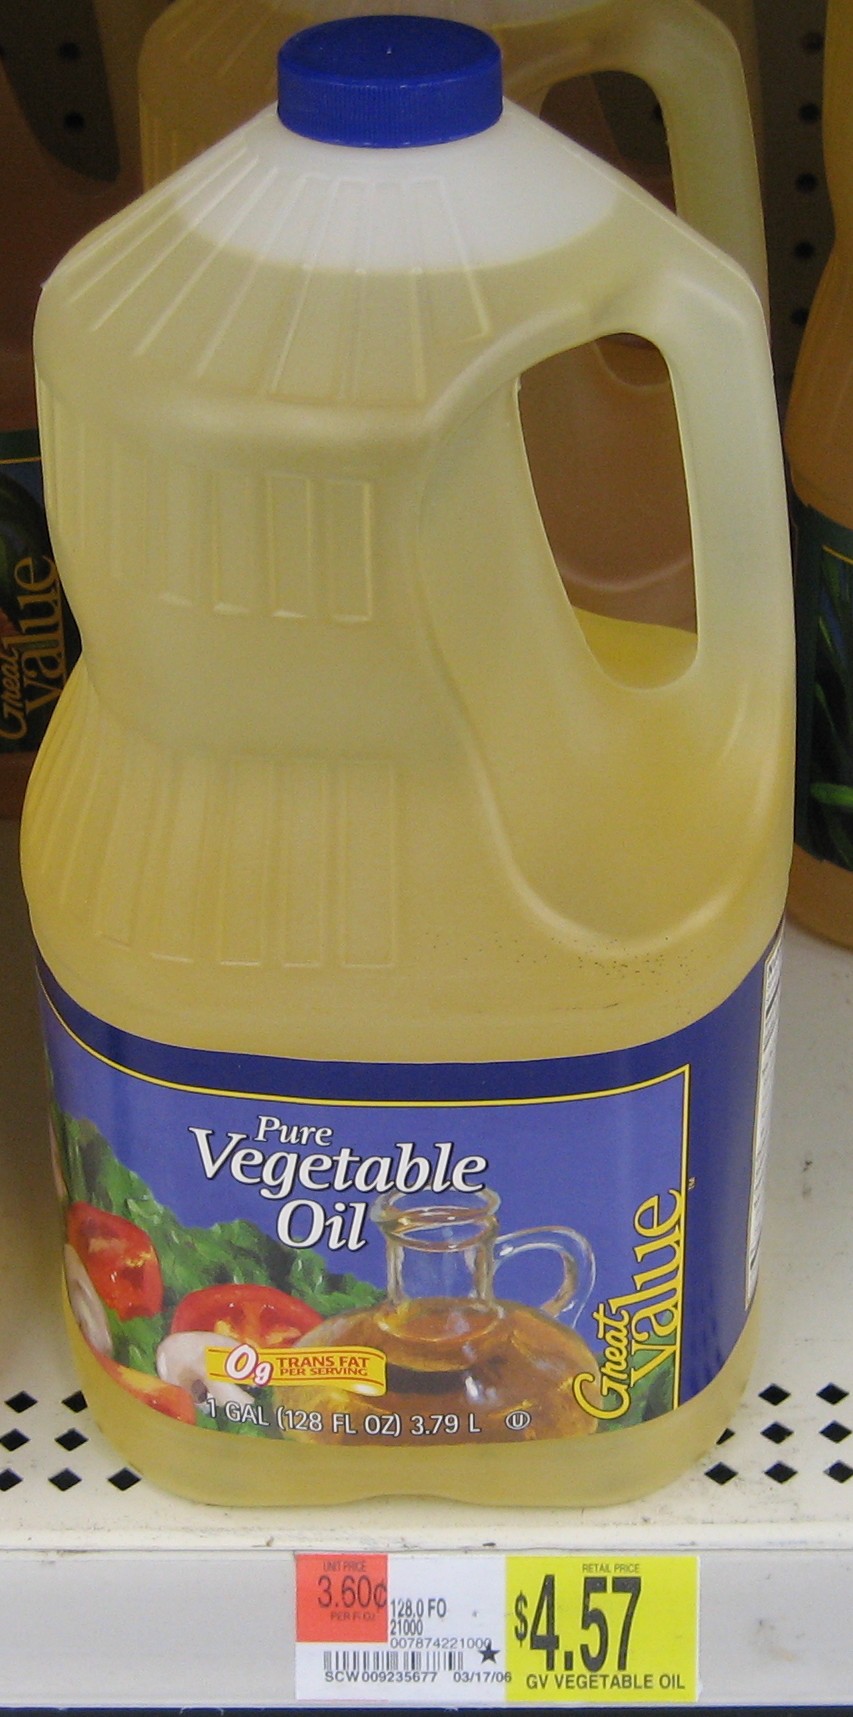 How Much Does a Gallon of Vegetable Oil Weigh?